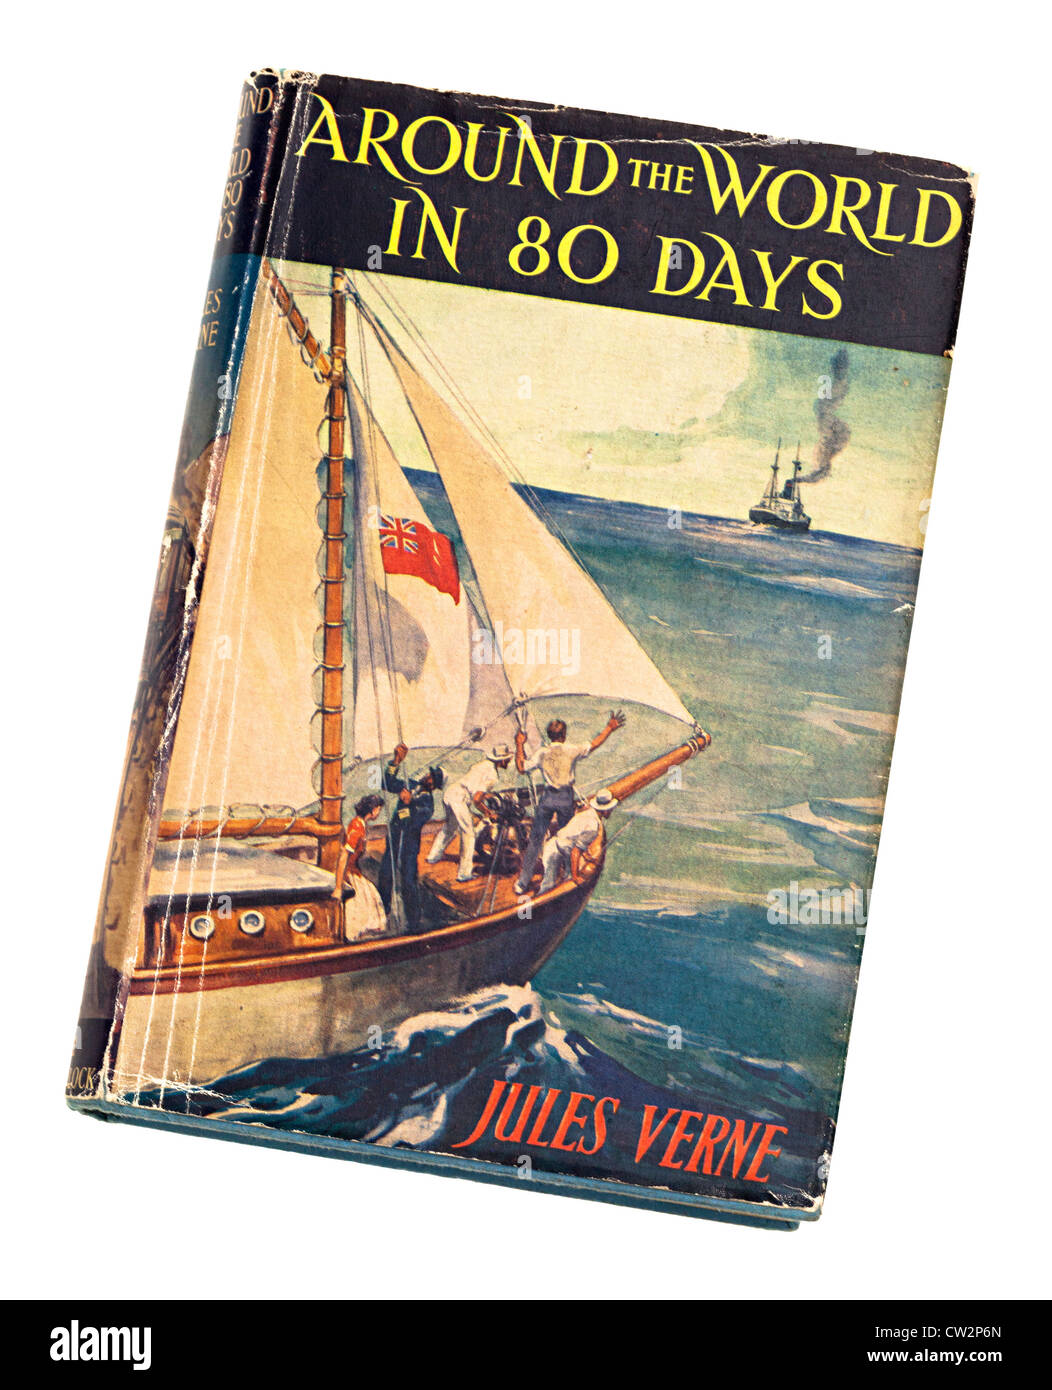 Classic childrens adventure story book Around the World in 80 Days by Jules Verne Stock Photo